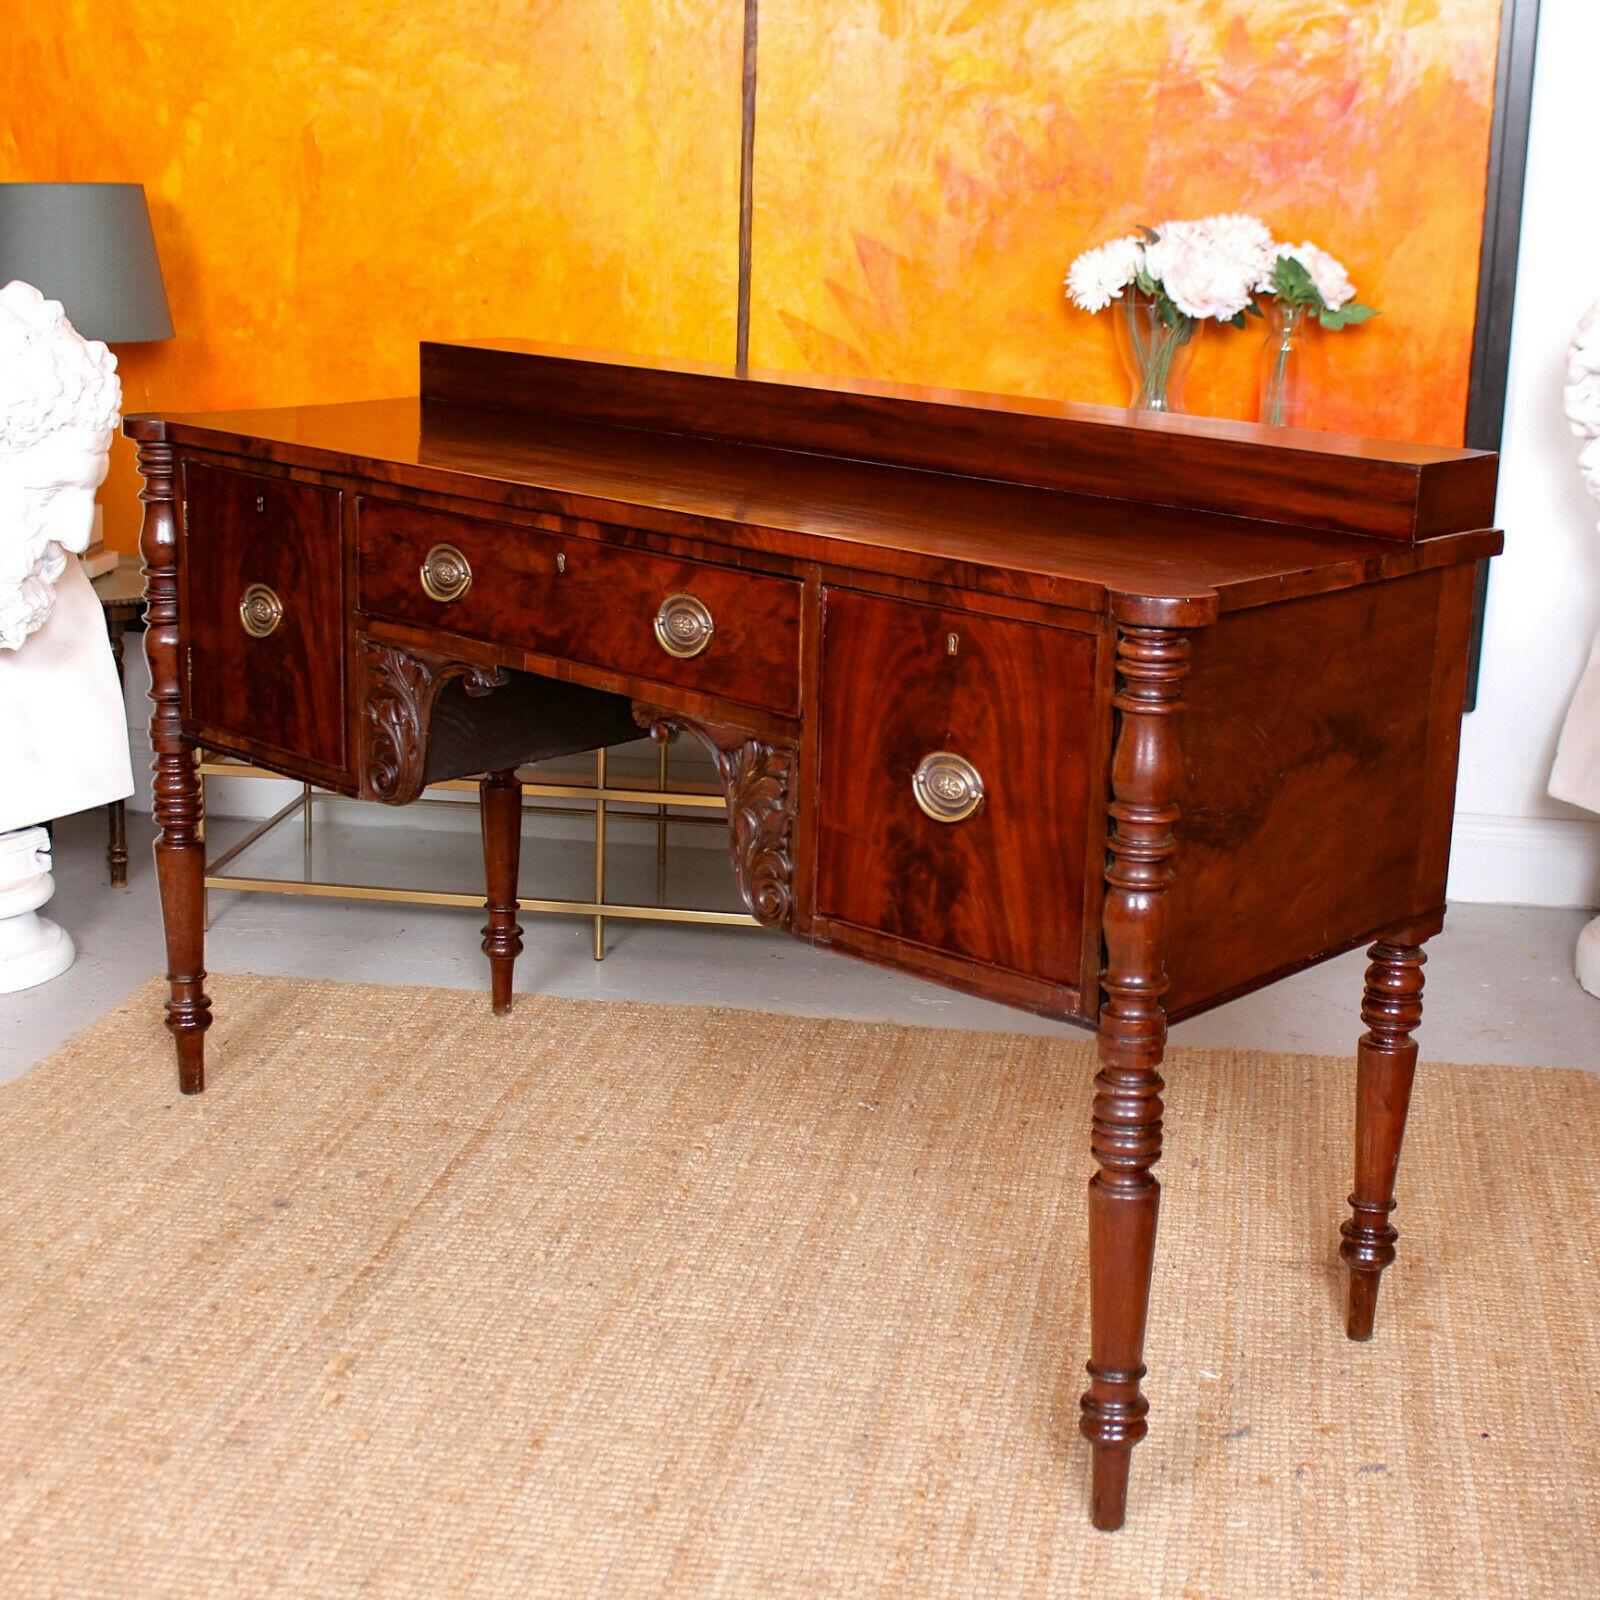 A fine quality rare form George IV period Cuban mahogany sideboard.
The polished flamed Cuban mahogany inlays boasting an impressive grain.
The platform step to the rectangular top having rounded corners supported on ring-turned column legs, the